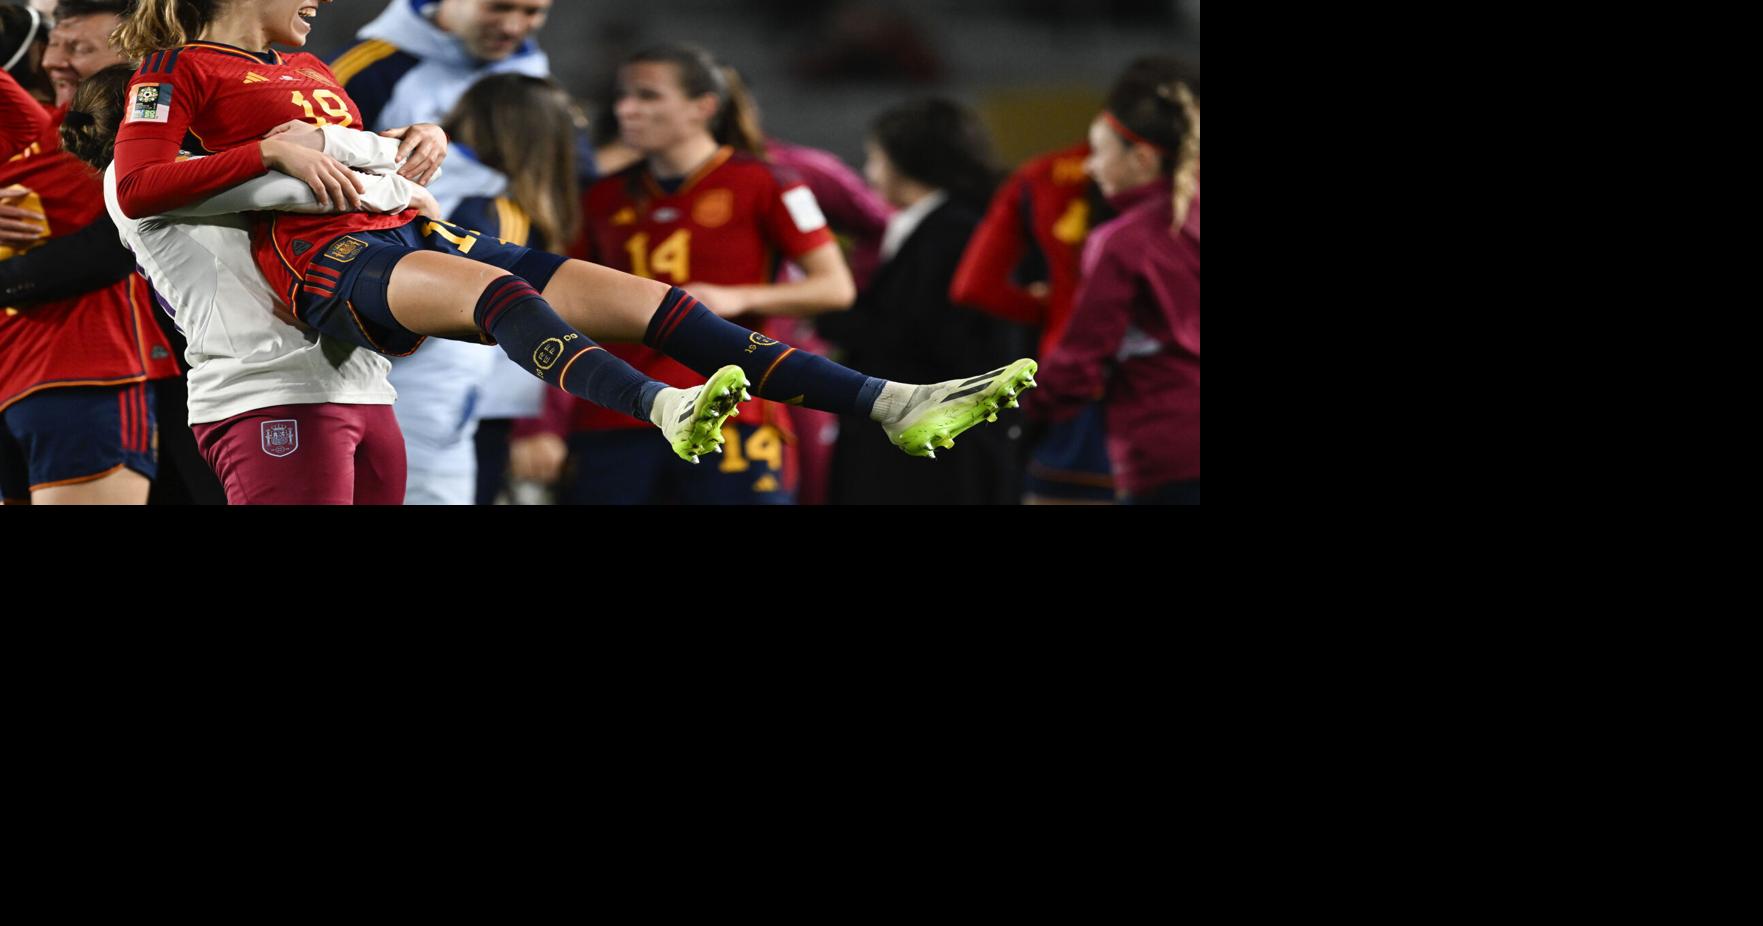 Olga Carmona scored in Spain's 1-0 Women's World Cup win. Then she learned  her father had died, Sports